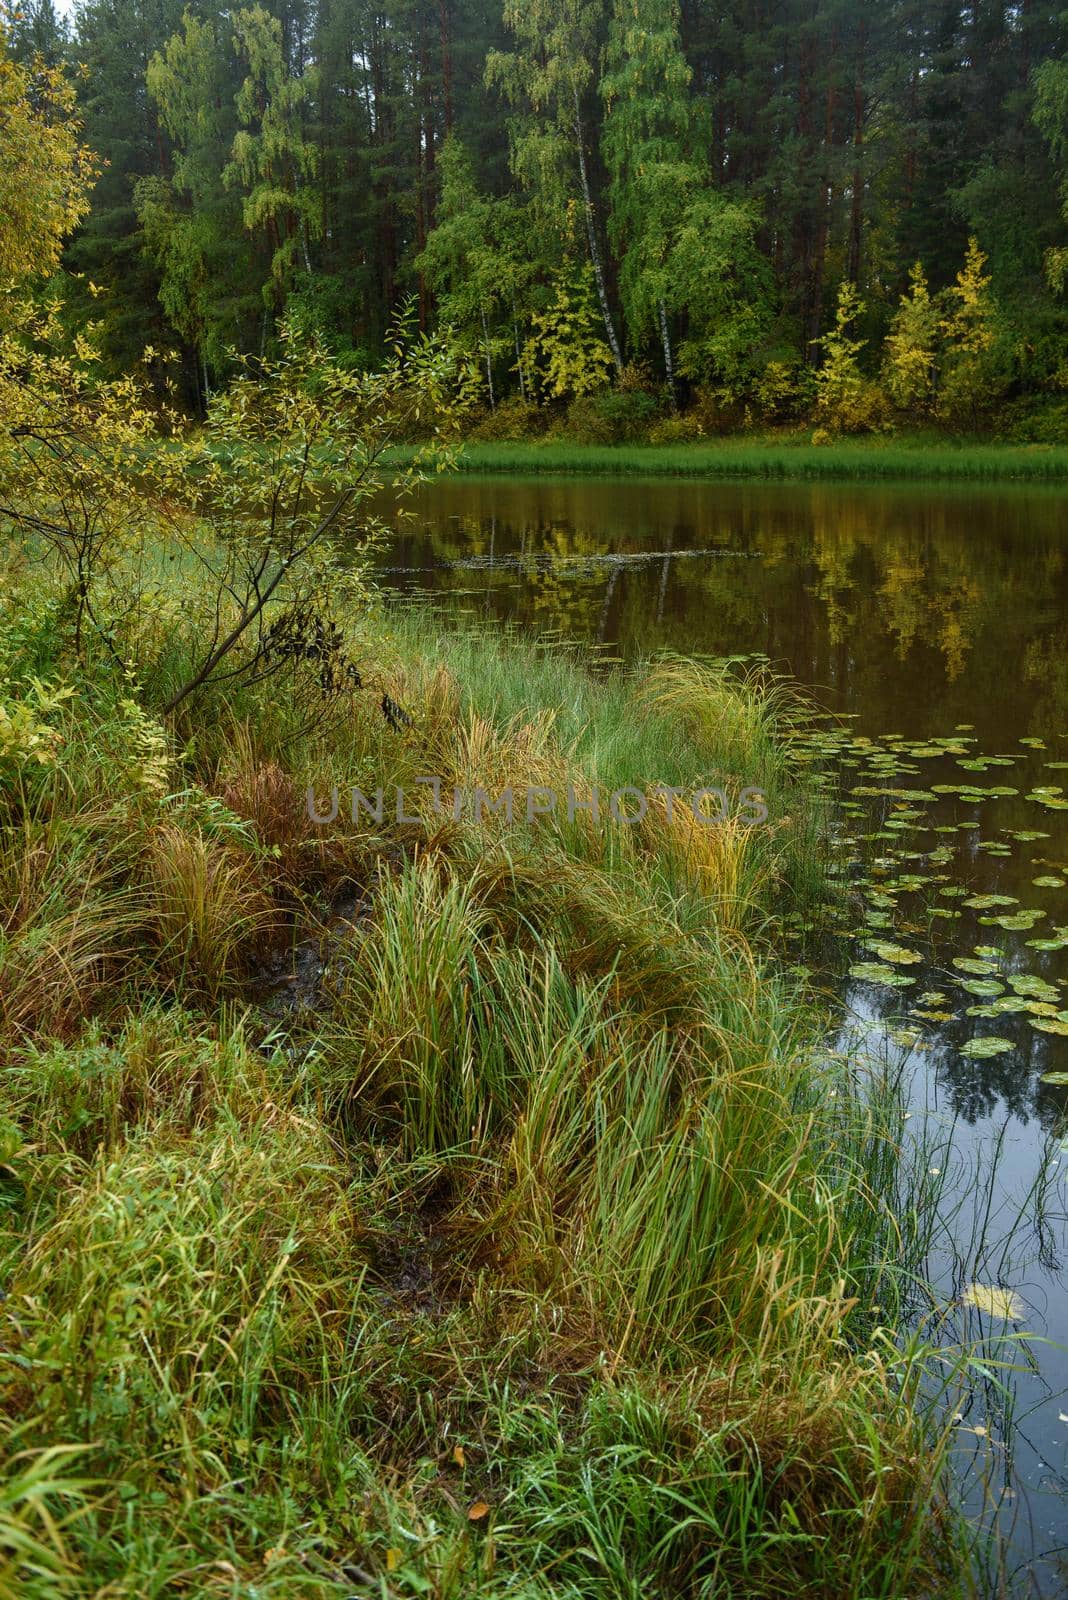 A picturesque lakein early autumn with grass and water-lily leaves